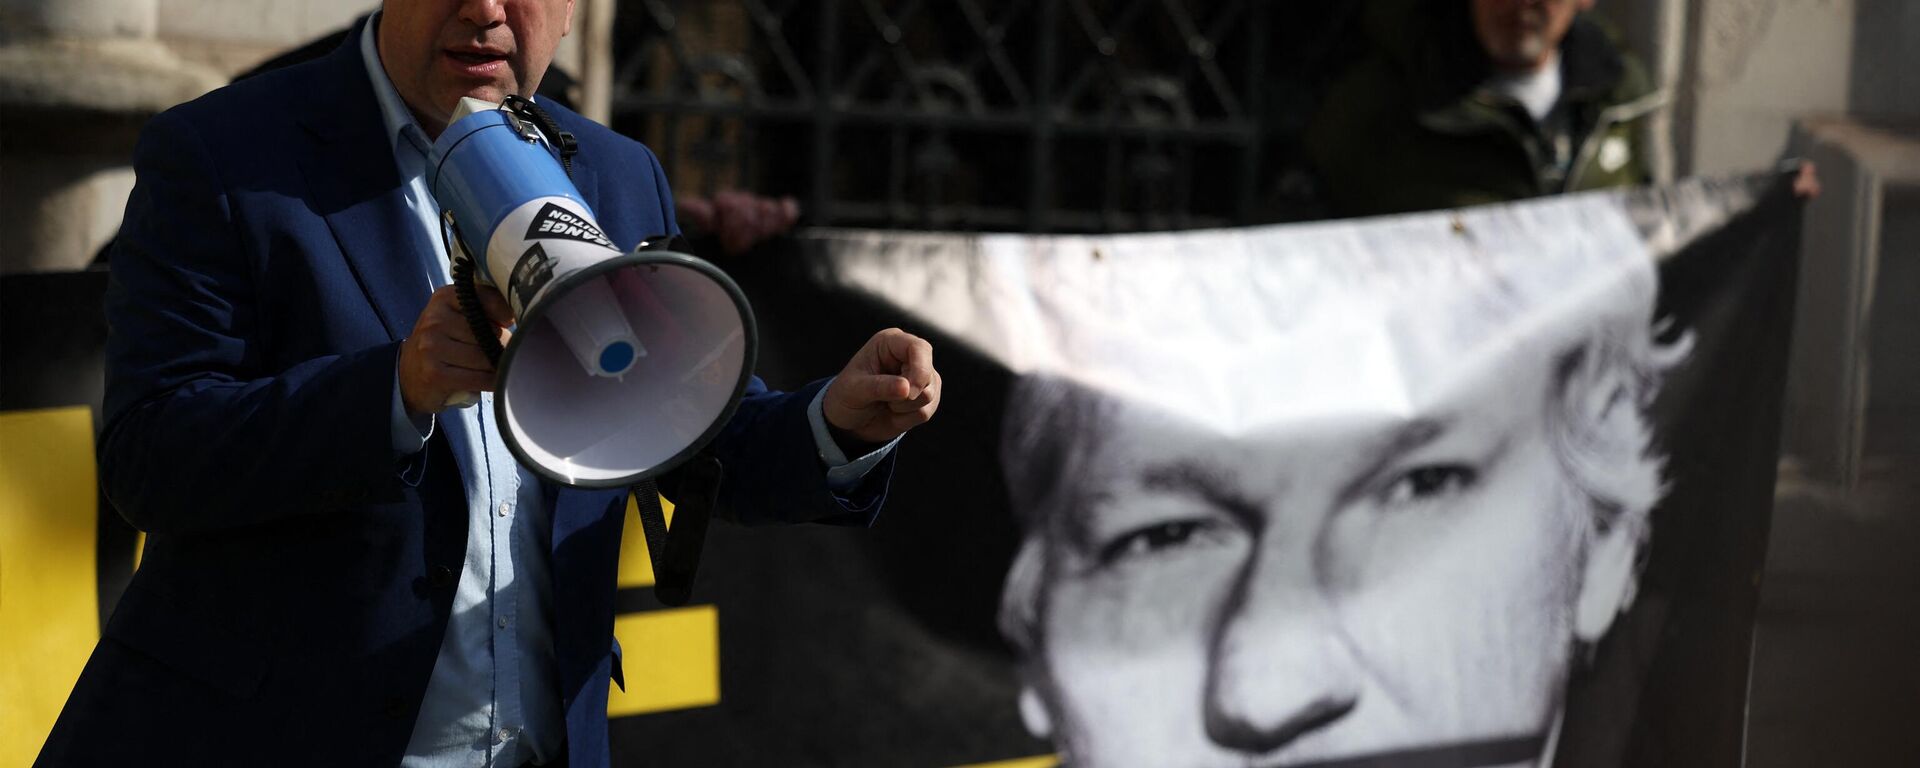 A supporter of WikiLeaks founder Julian Assange, Richard Burgon, the Labour Party MP for Leeds East, speaks outside The Royal Courts of Justice, Britain's High Court, in central London on March 26, 2024. - Sputnik International, 1920, 26.03.2024